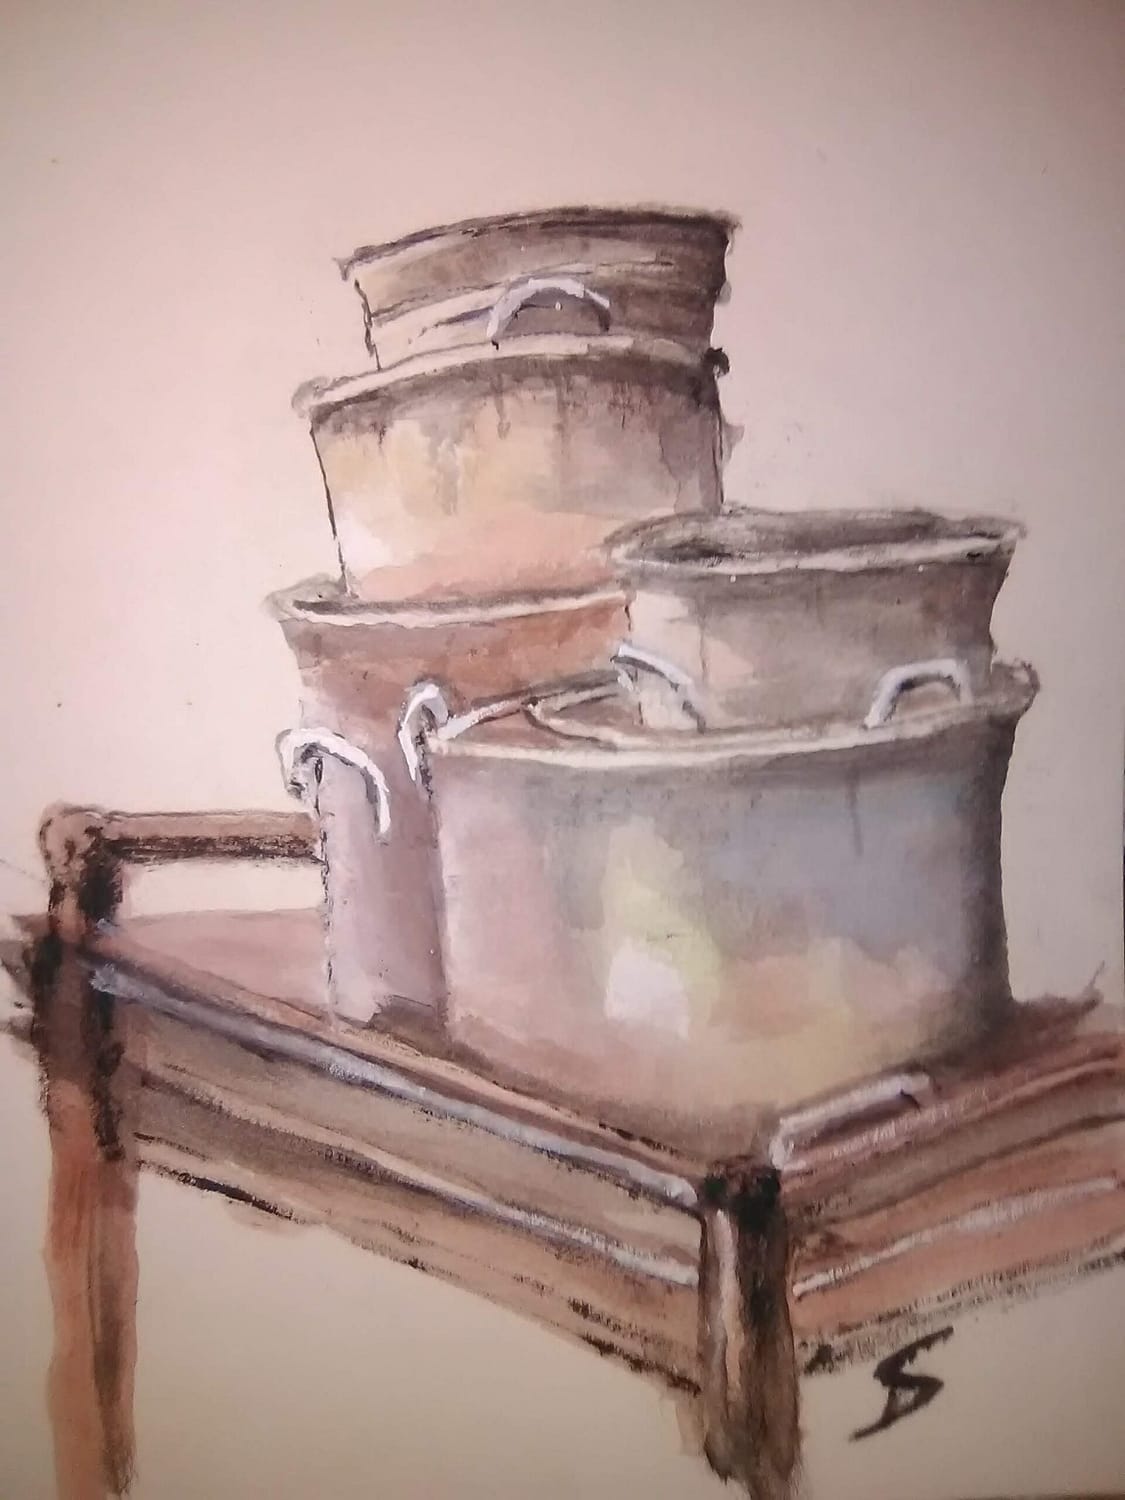 watercolor exercise #11 - kitchen chaos